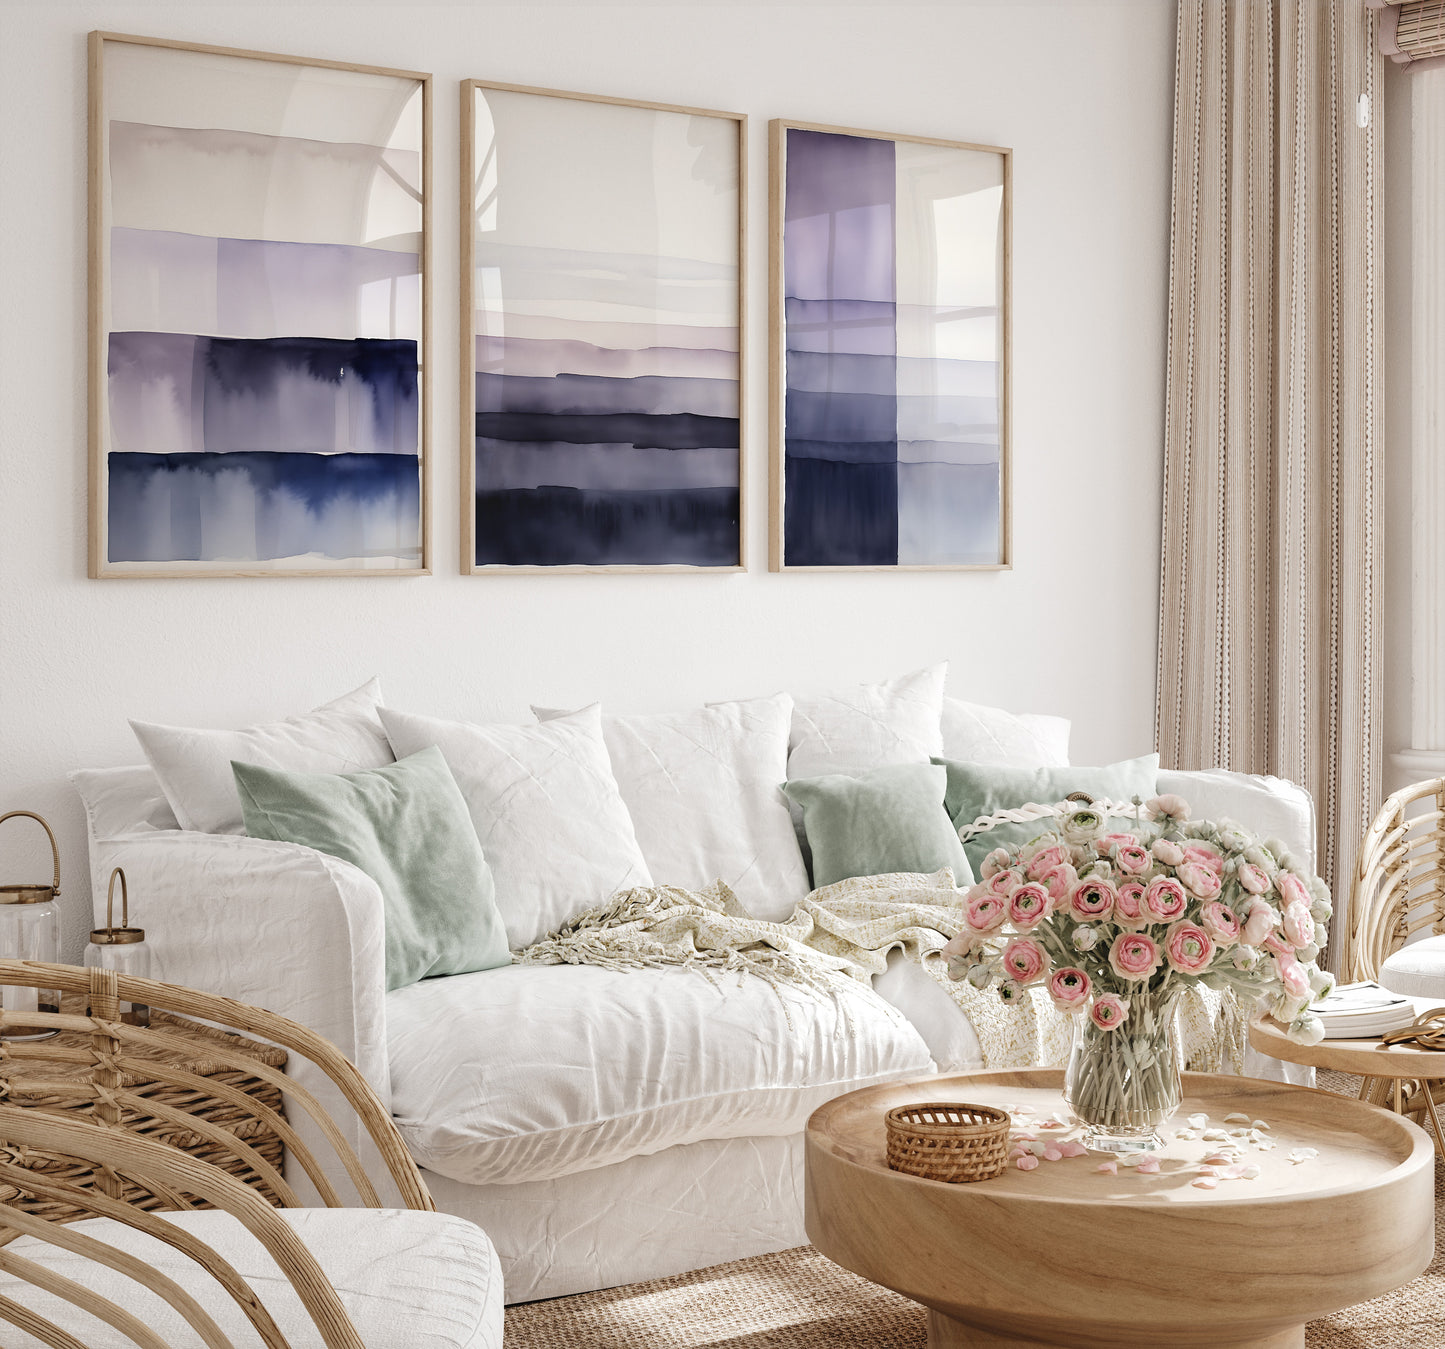 A cozy bedroom with a white bed, pastel pillows, and abstract wall art.